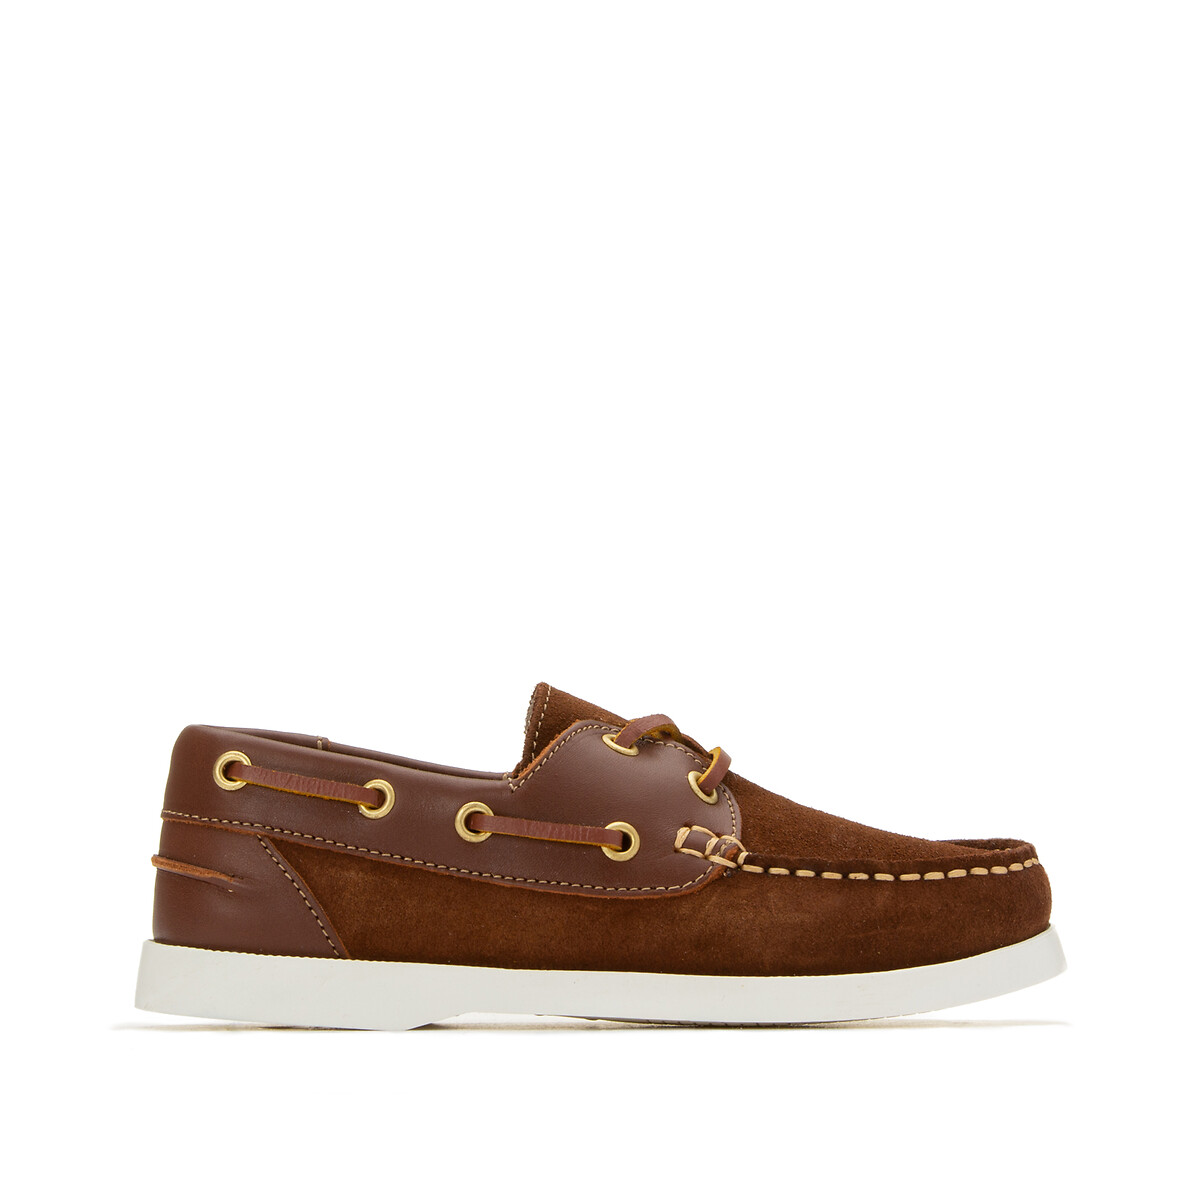 Kids Suede Boat Shoes